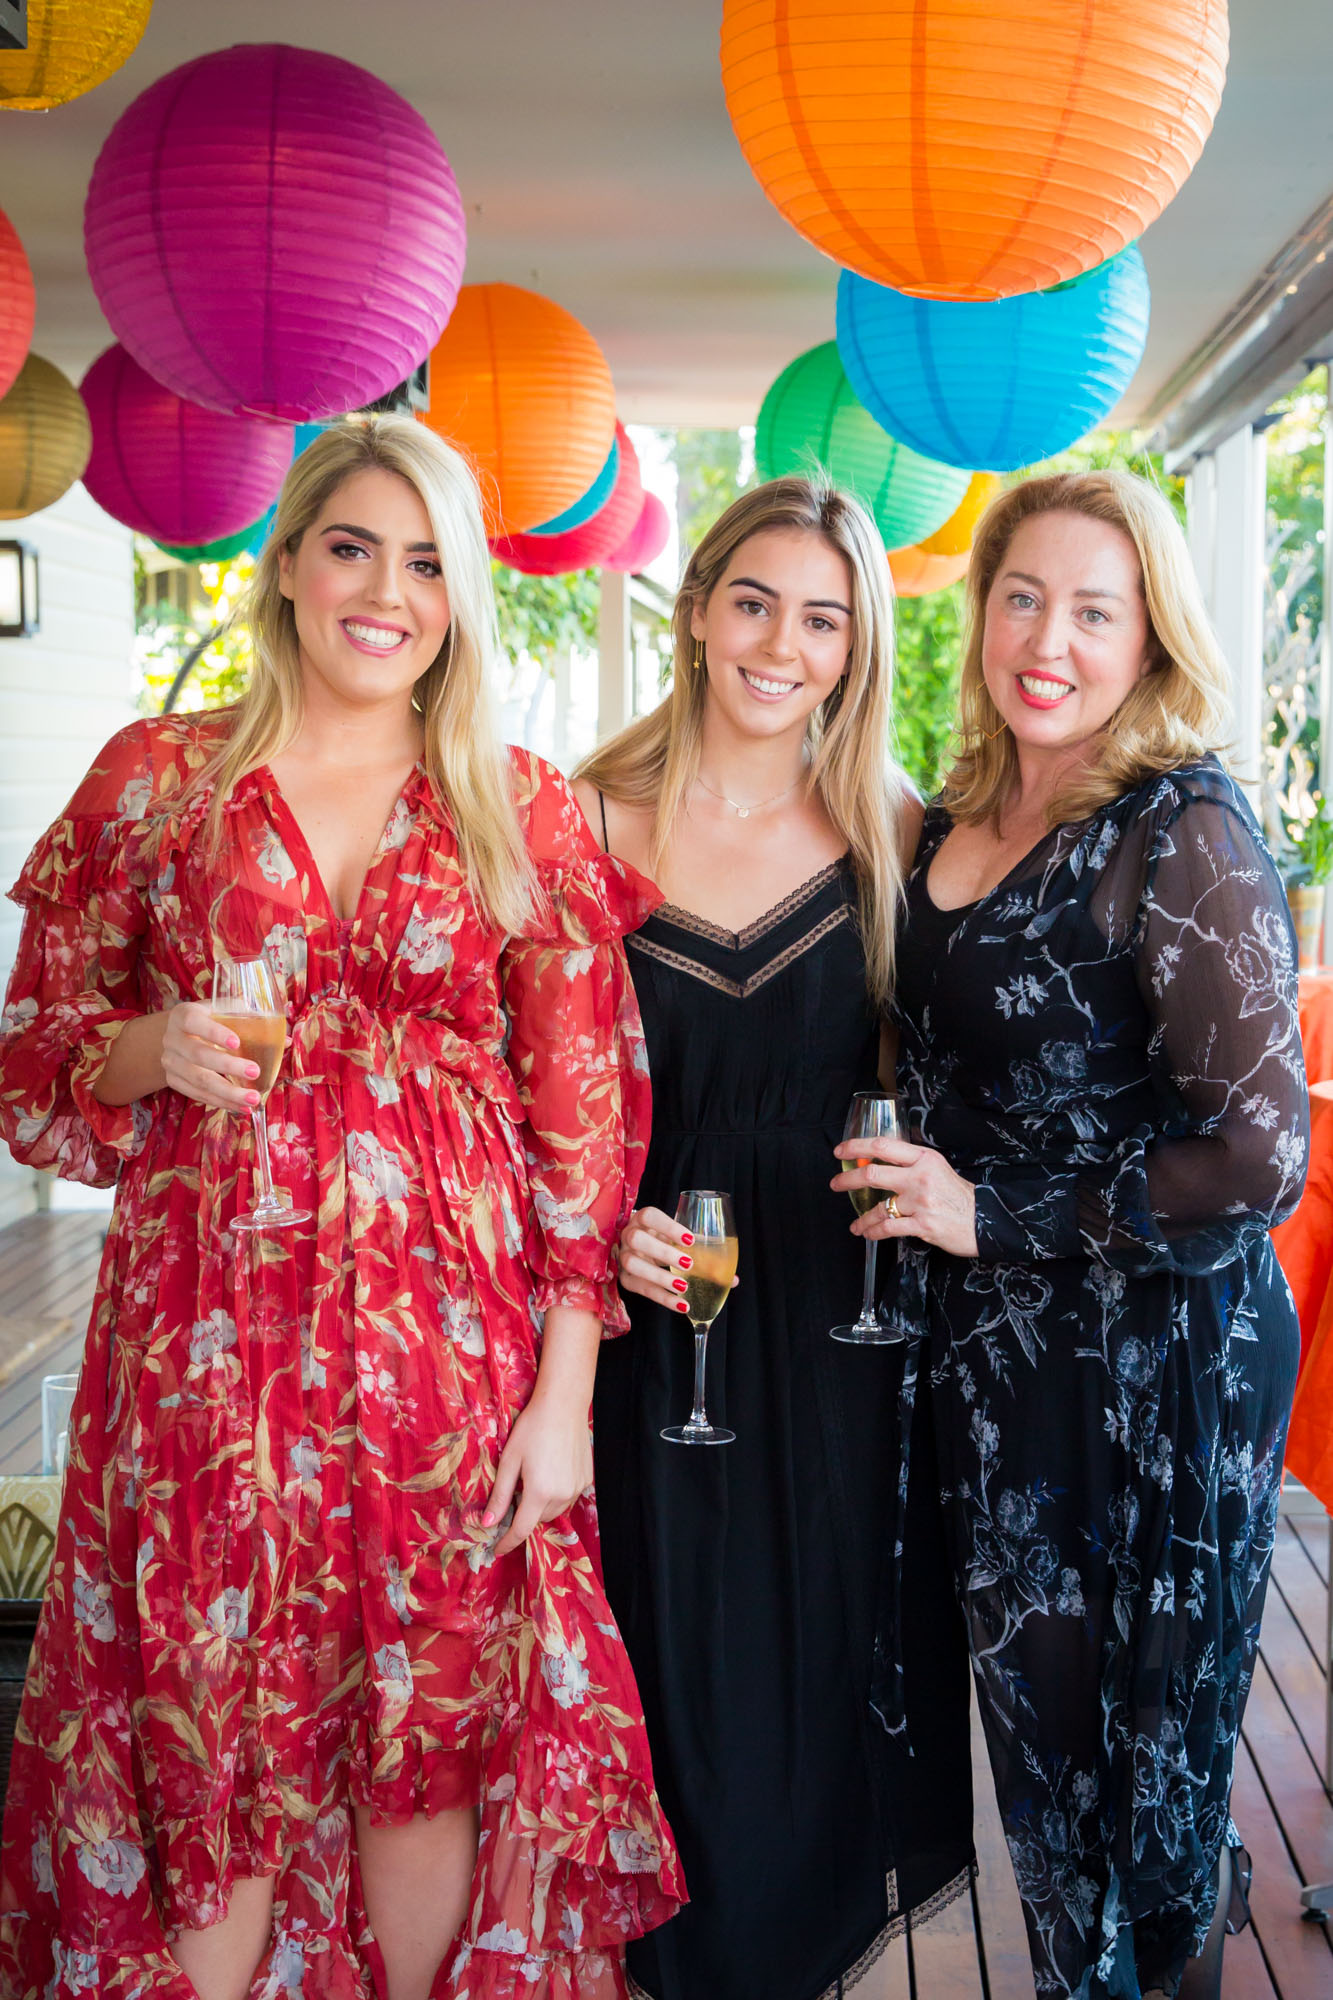 Evettes 21st Birthday Party Photography Herston Brisbane Anna Osetroff Event Photographer